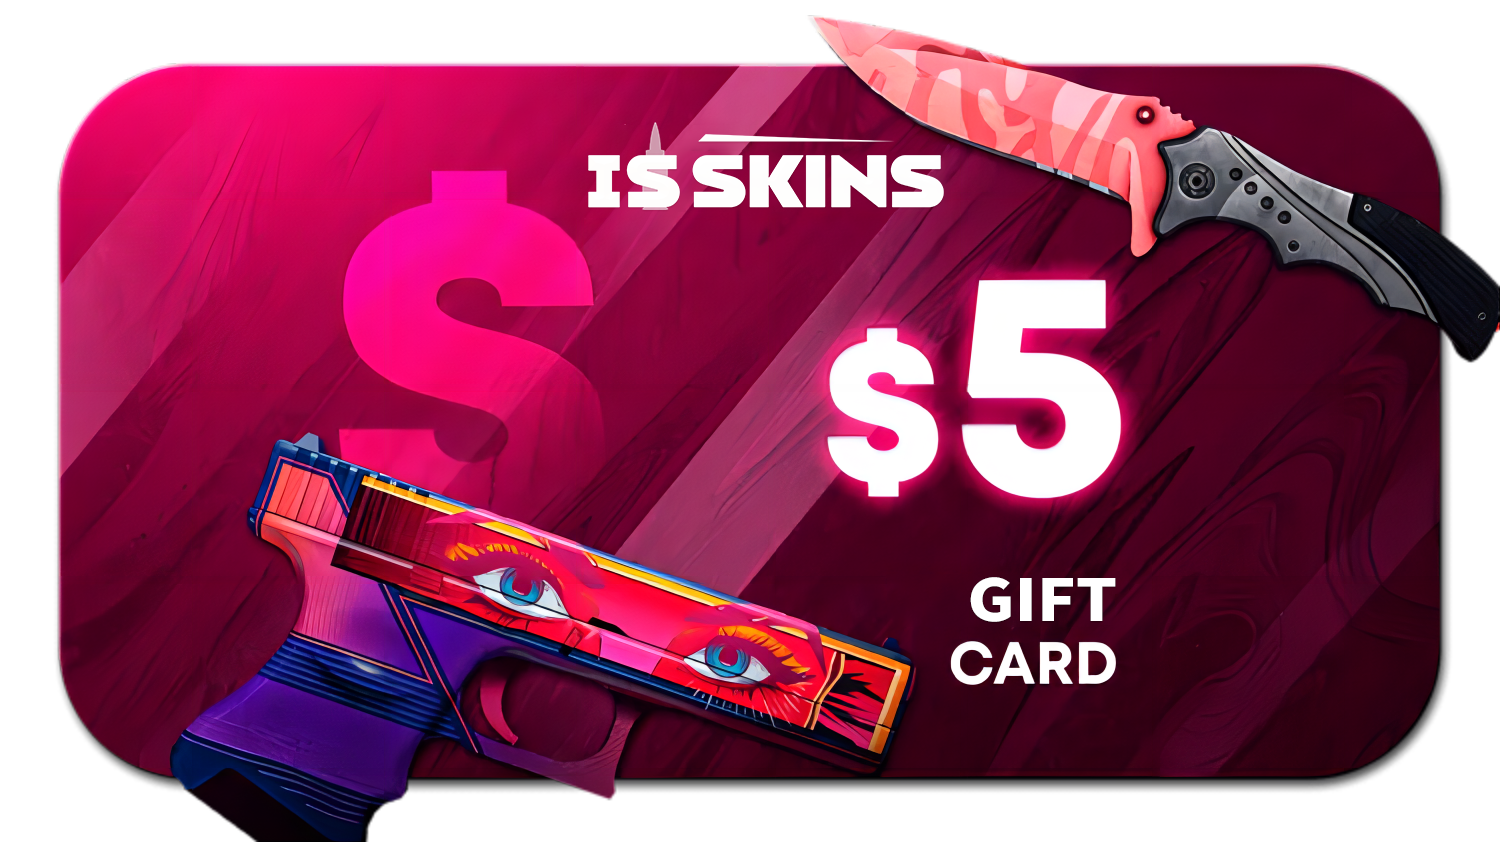 ISSKINS $5 Gift Card 5.29 $